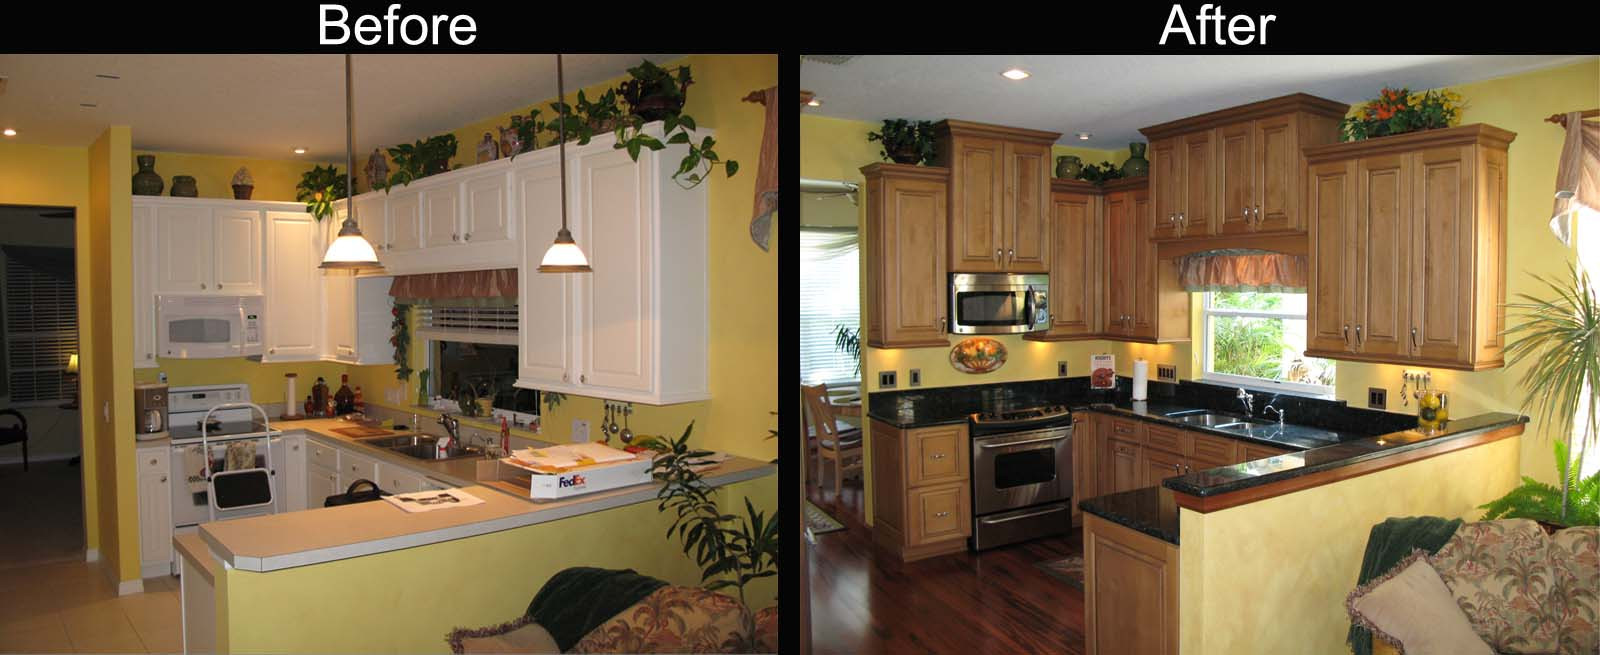 Before And After Kitchen Remodel
 Kitchen Decor Kitchen Remodel Before And After